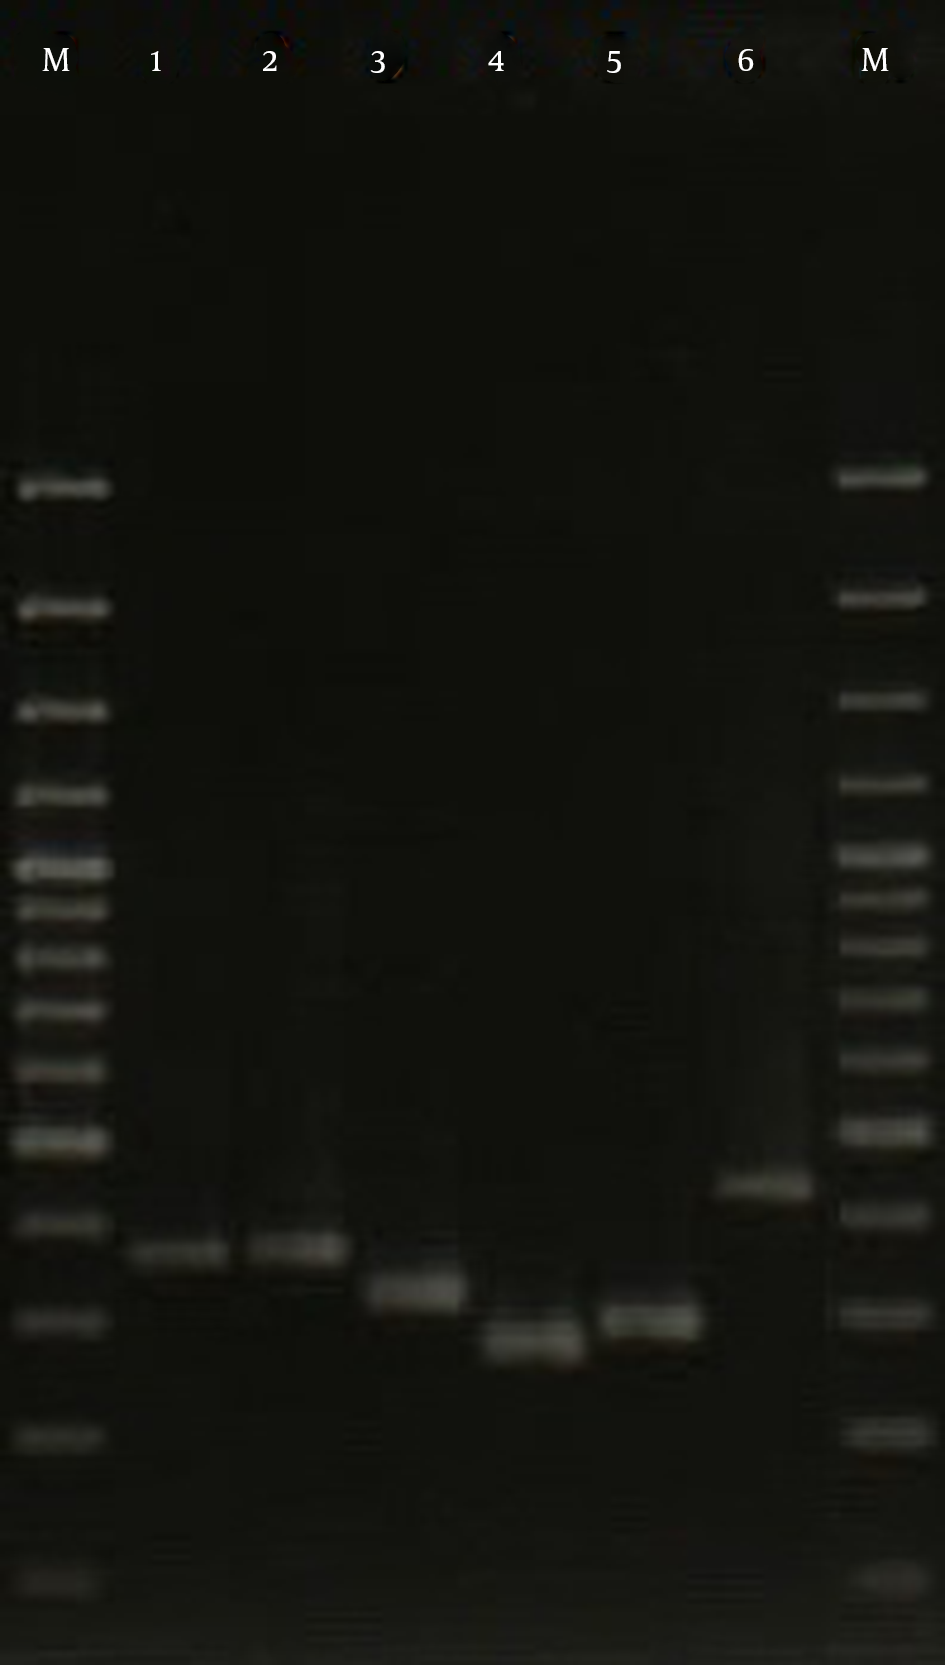 Lane M, 100-bp DNA Ladder (Fermentas, UK); Lanes 1 to 6, the Variable PCR Product of spa